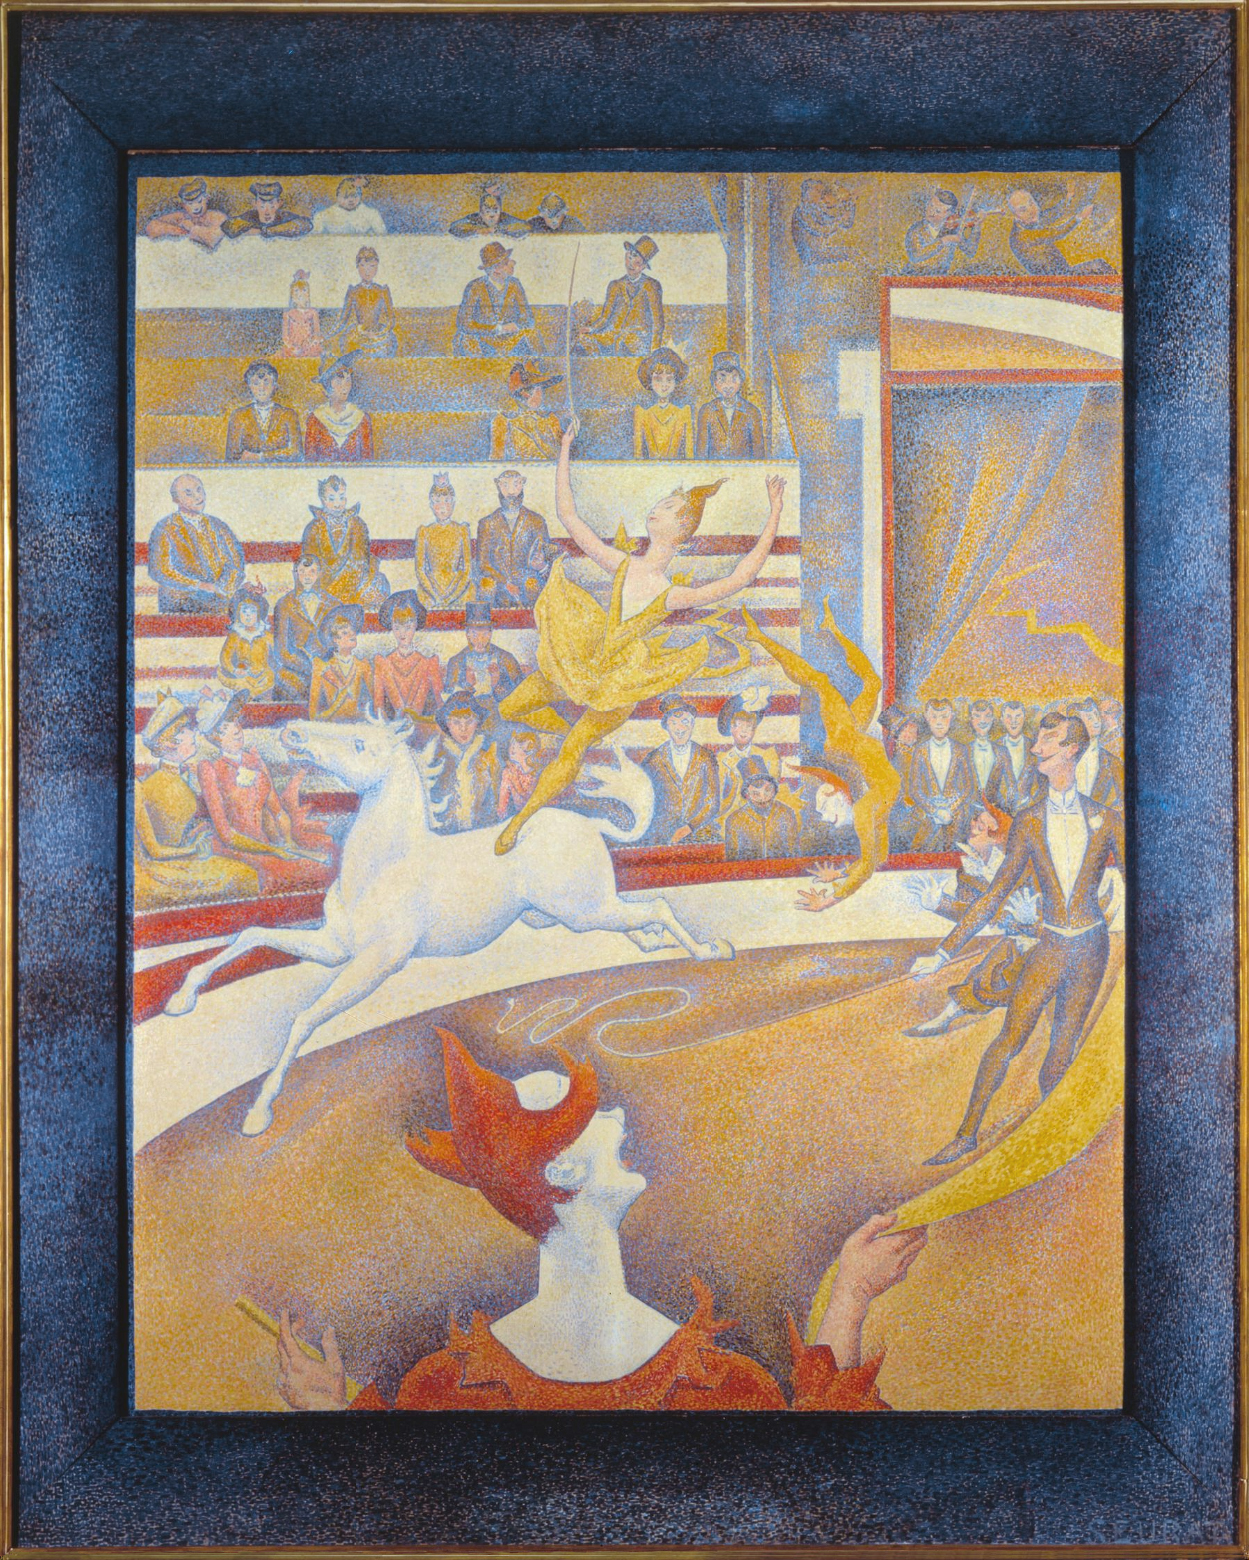 Georges Seurat, The Circus, 1890-91, oil on canvas, 186 x 152 cm (Musée d’Orsay)